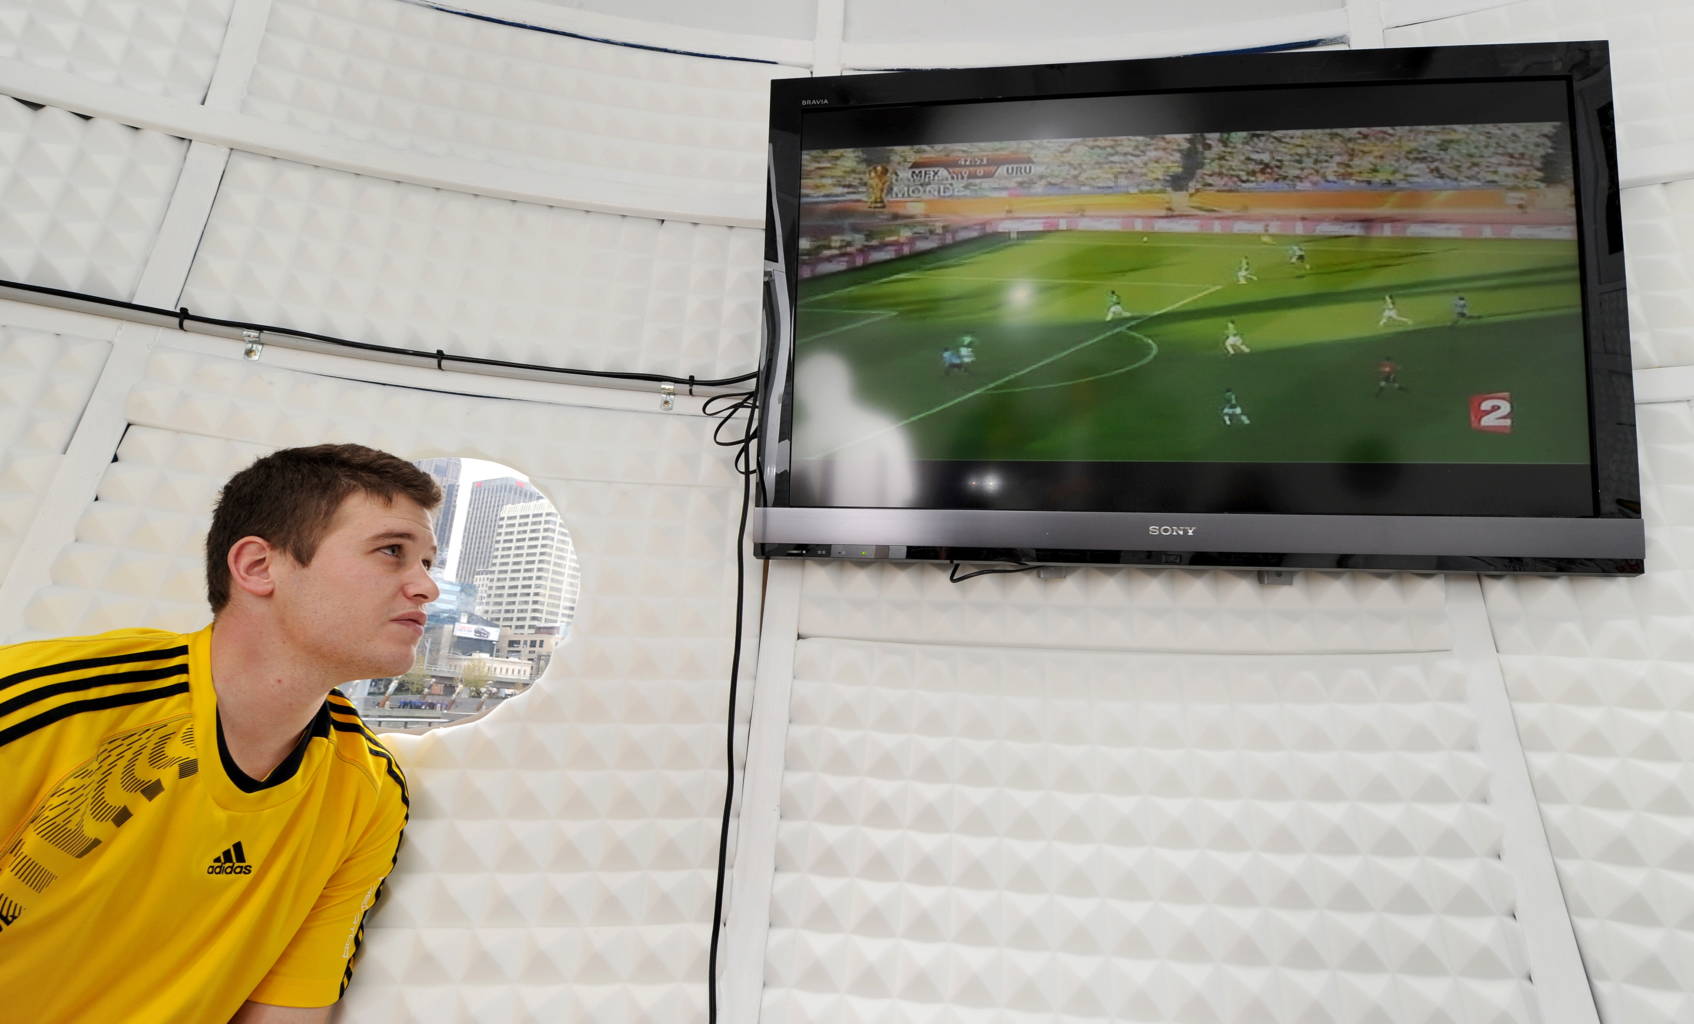 Competition winner Adam Santarossa watches the TV screen as he spends 31 days in a giant replica Jabulani World Cup ball, watching all 64 games from South Africa, in Melbourne on June 23, 2010.  Santarossa has to spend a minimum of 22 hours a day in the ball, only been allowed out for toilet breaks, food and a bit of excercise.  The giant Jabulani, which is a bit harder to kick than the real ball, weighs in at two tonnes, is 6m high and 6m wide, a scale of 30:1 over the actual Jabulani, and is Santarossa home for the World Cup and where he spends his spare time doing daily blogs and match reports after every match.  AFP PHOTO/William WEST (Photo credit should read WILLIAM WEST/AFP via Getty Images)